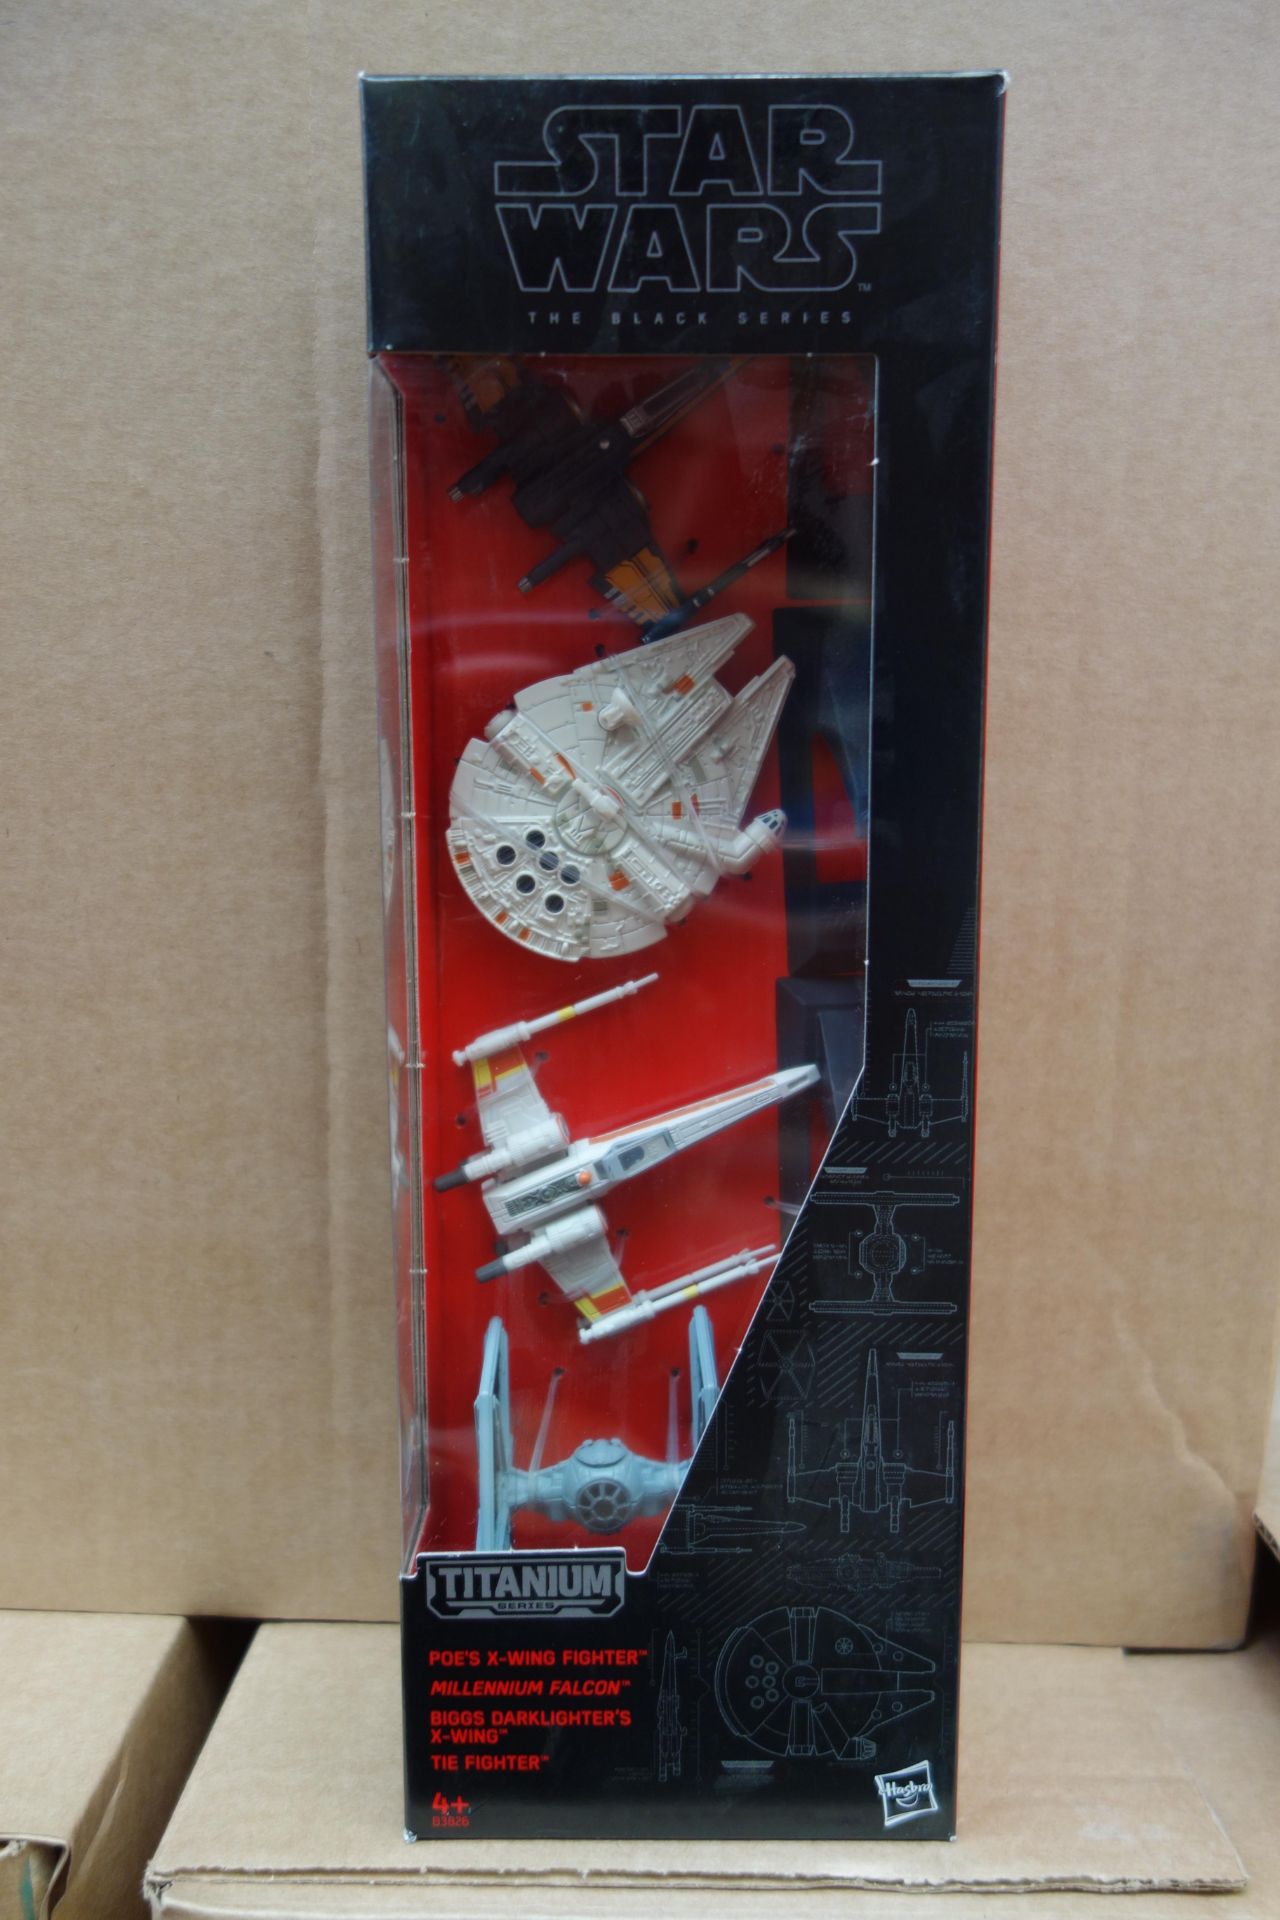 12 x Brand New - Star Wars Titanium Series 4 Pack Diecast Model Set. Includes: Poe's X Wing Fighter,